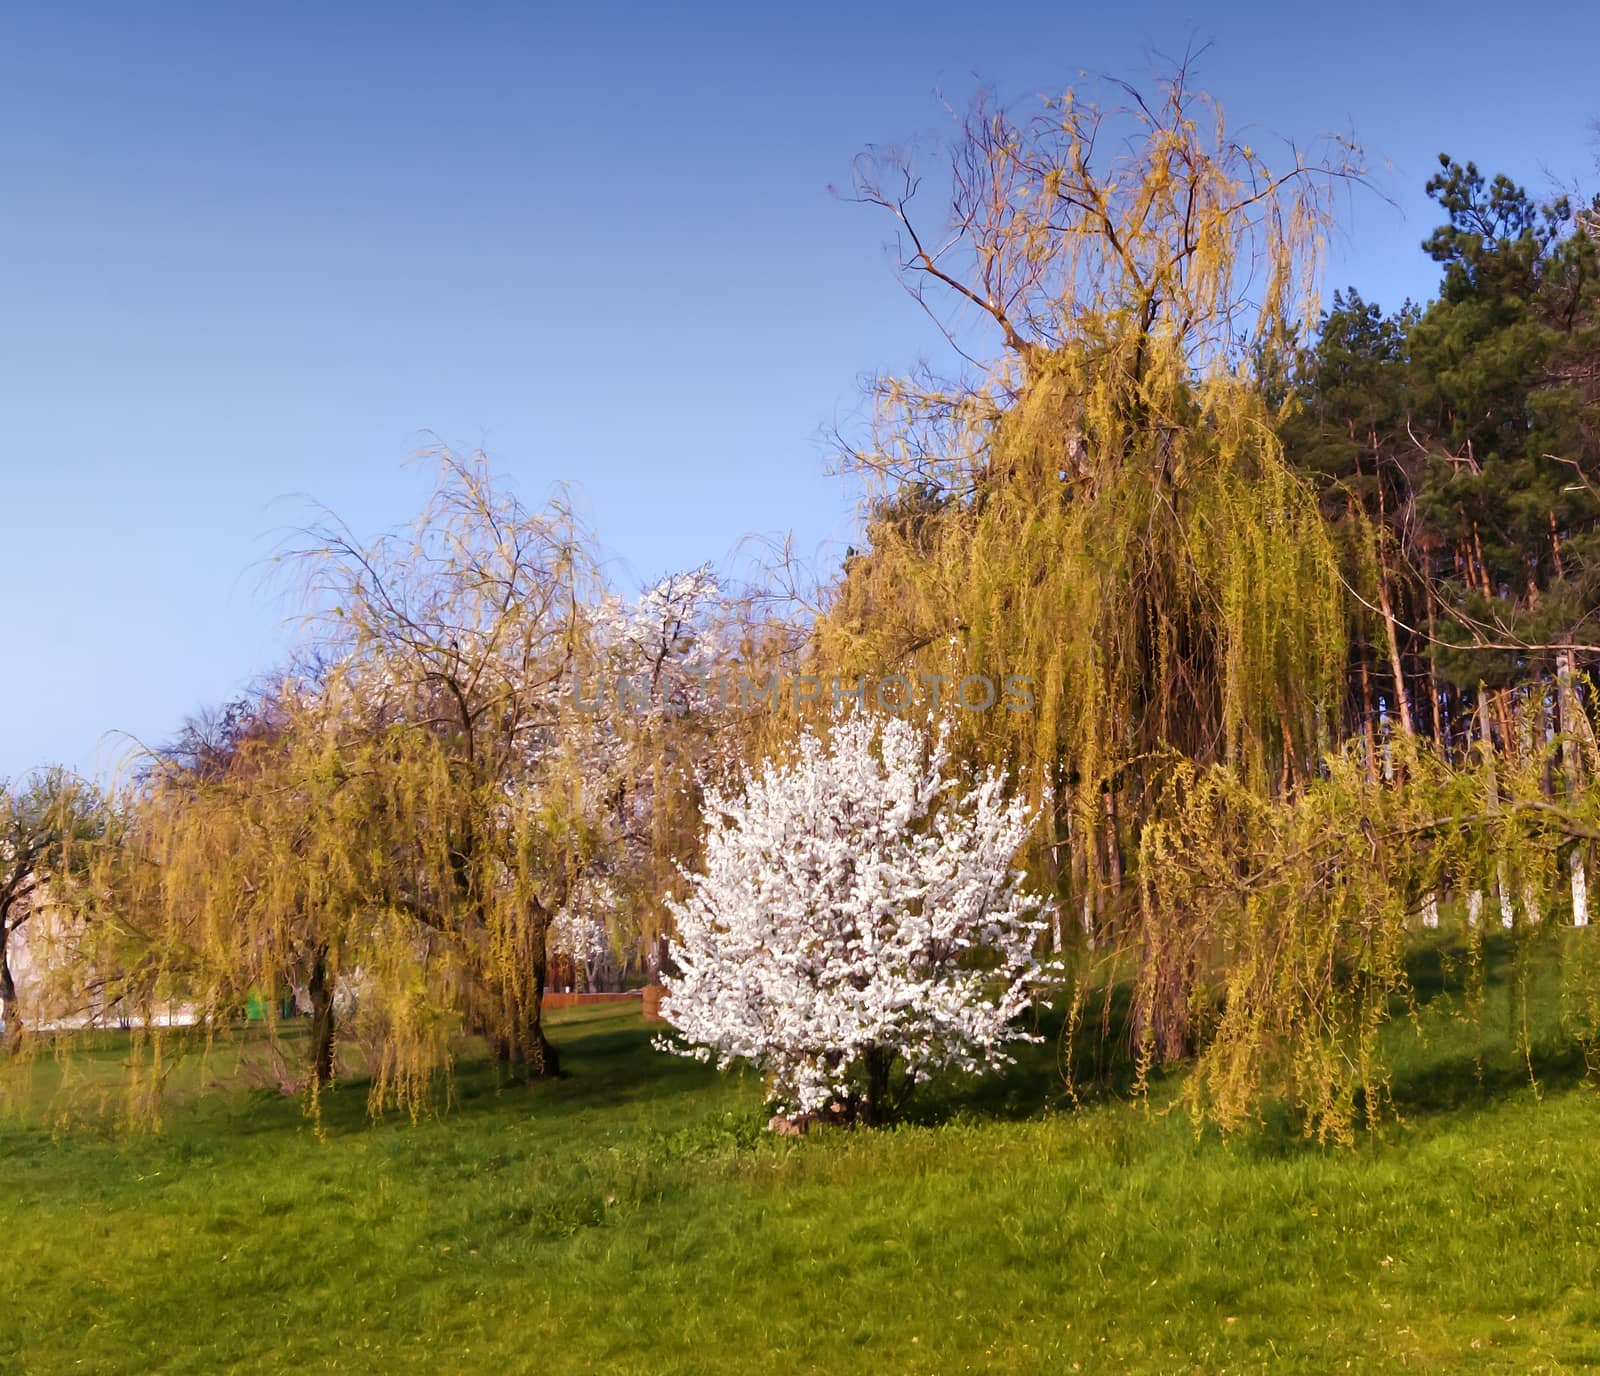 Fruit flowering tree in spring in the park, grass, trees and blue sky